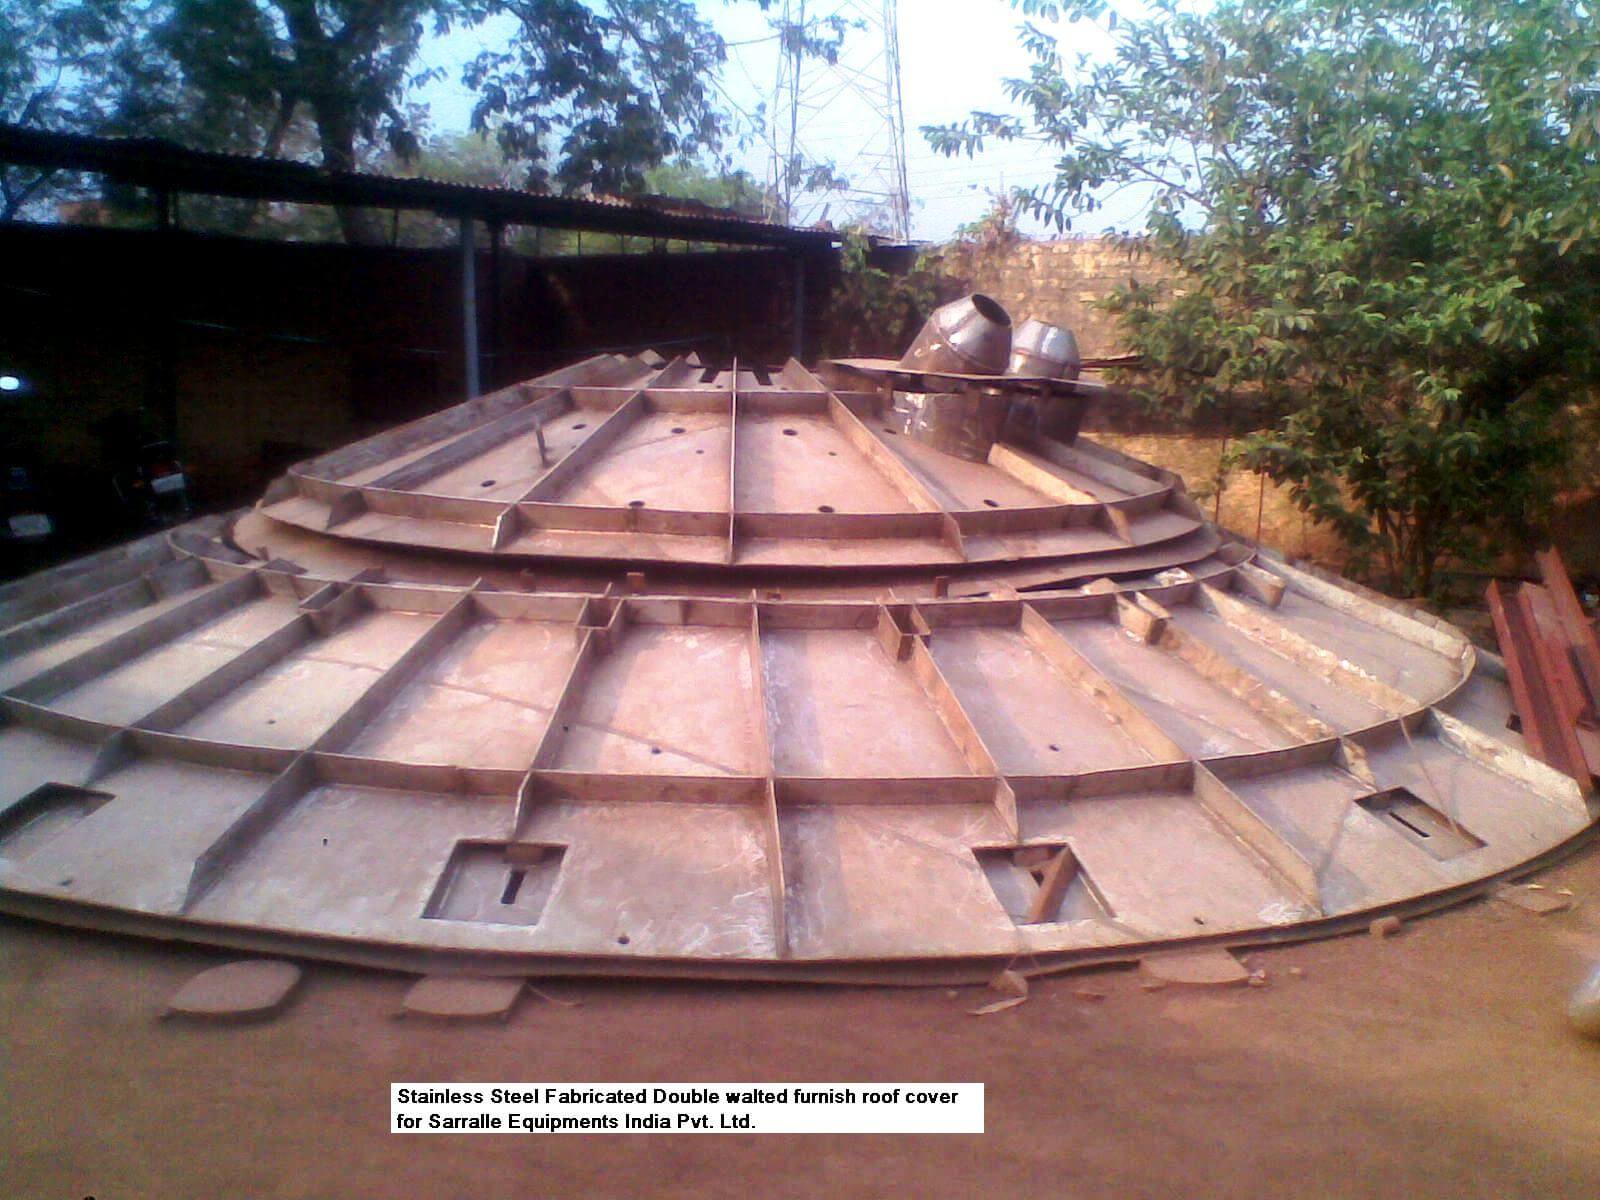 Stainless Steel Fabricated Double walted furnish roof cover for Sarralle Equipment India Pvt. Ltd.